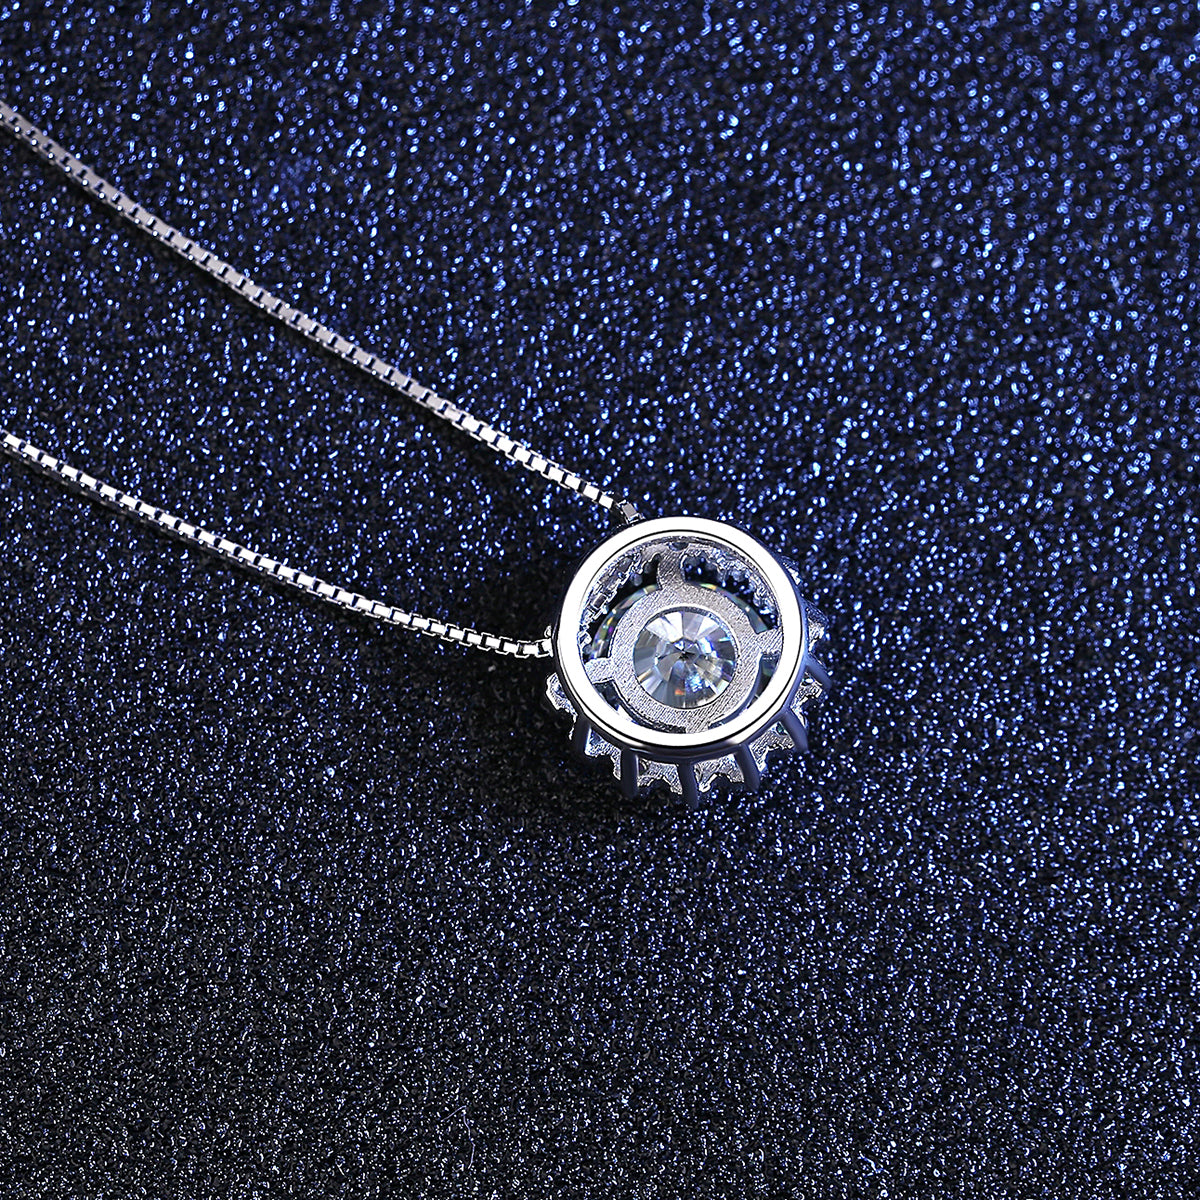 1 CT Moissanite Silver Necklace